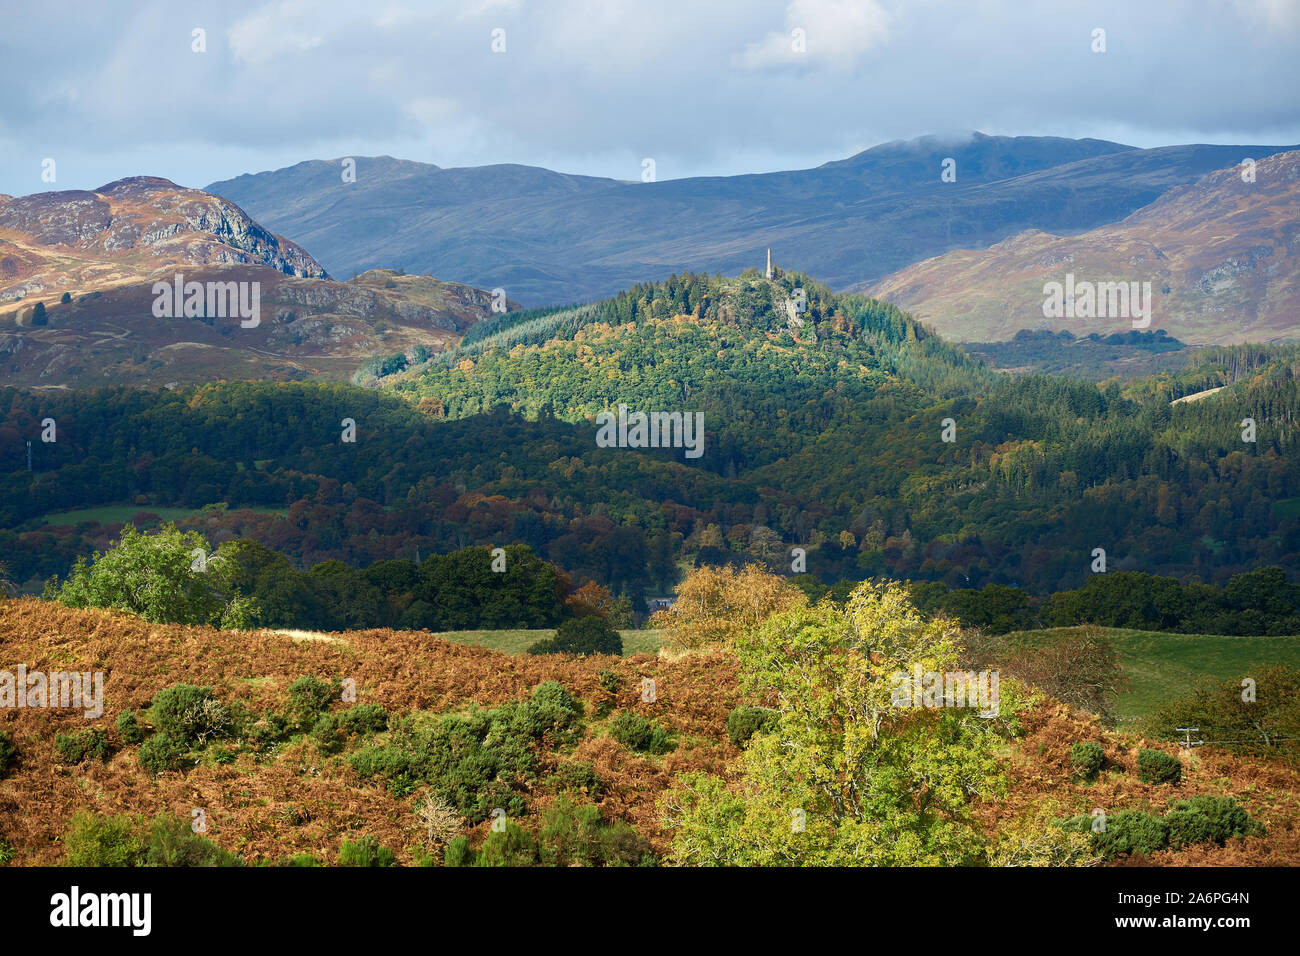 A view from the Auchingarrich Wildlife Centre on Lord Melville's Monument located on the summit of Dun More, overlooking Comrie, Perthshire, Scotland. Stock Photo